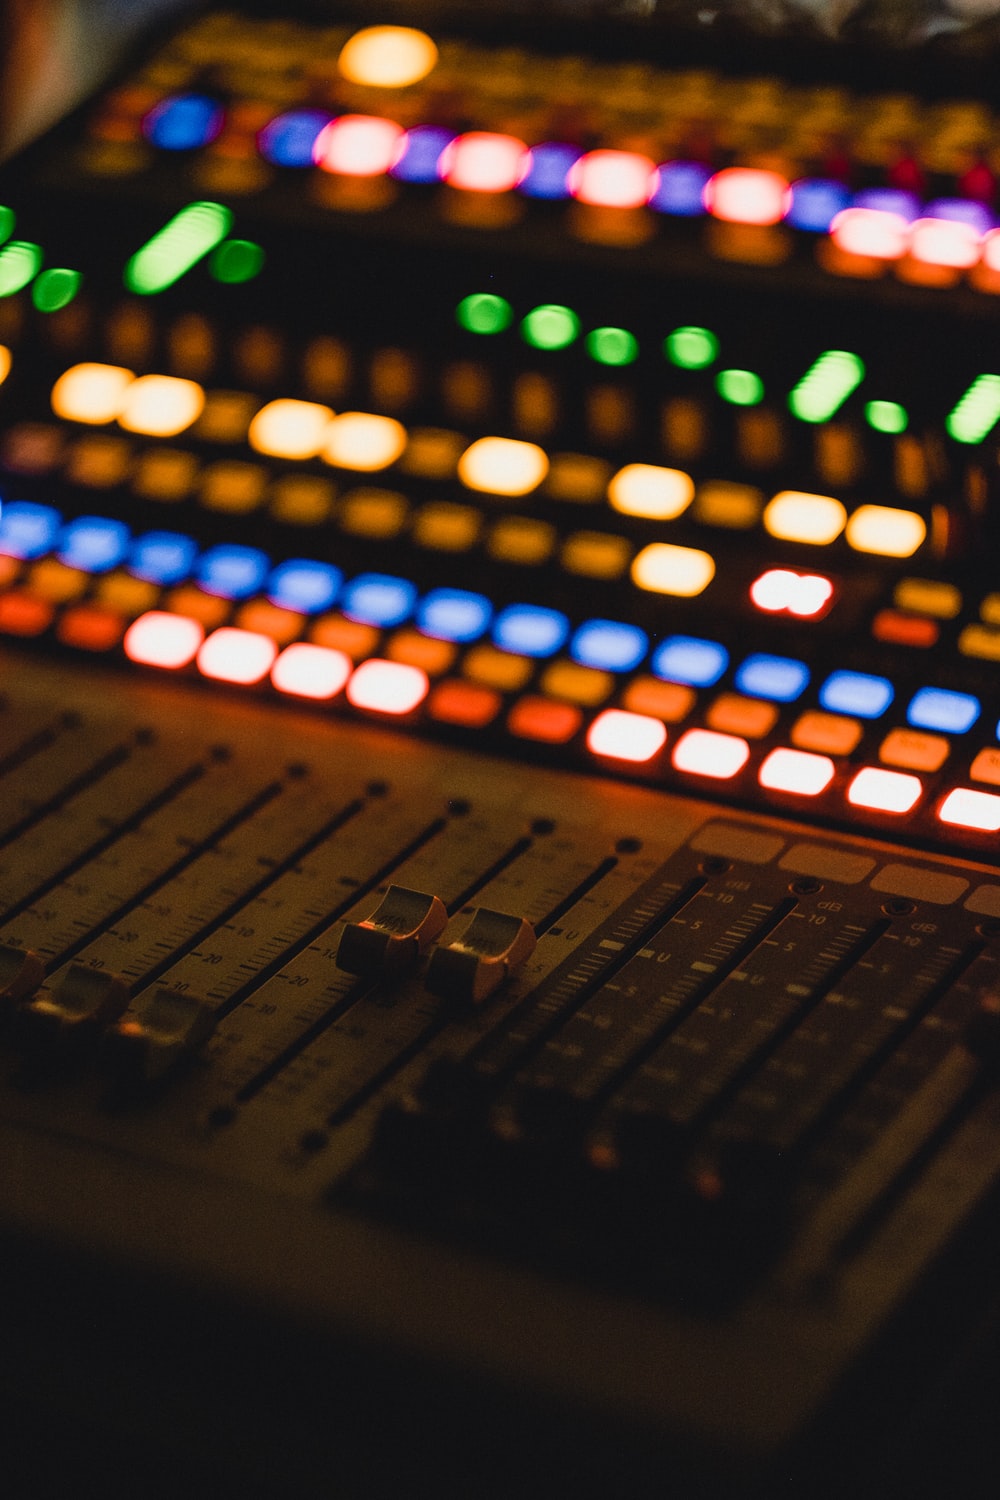 Mixing Console Picture. Download Free Image